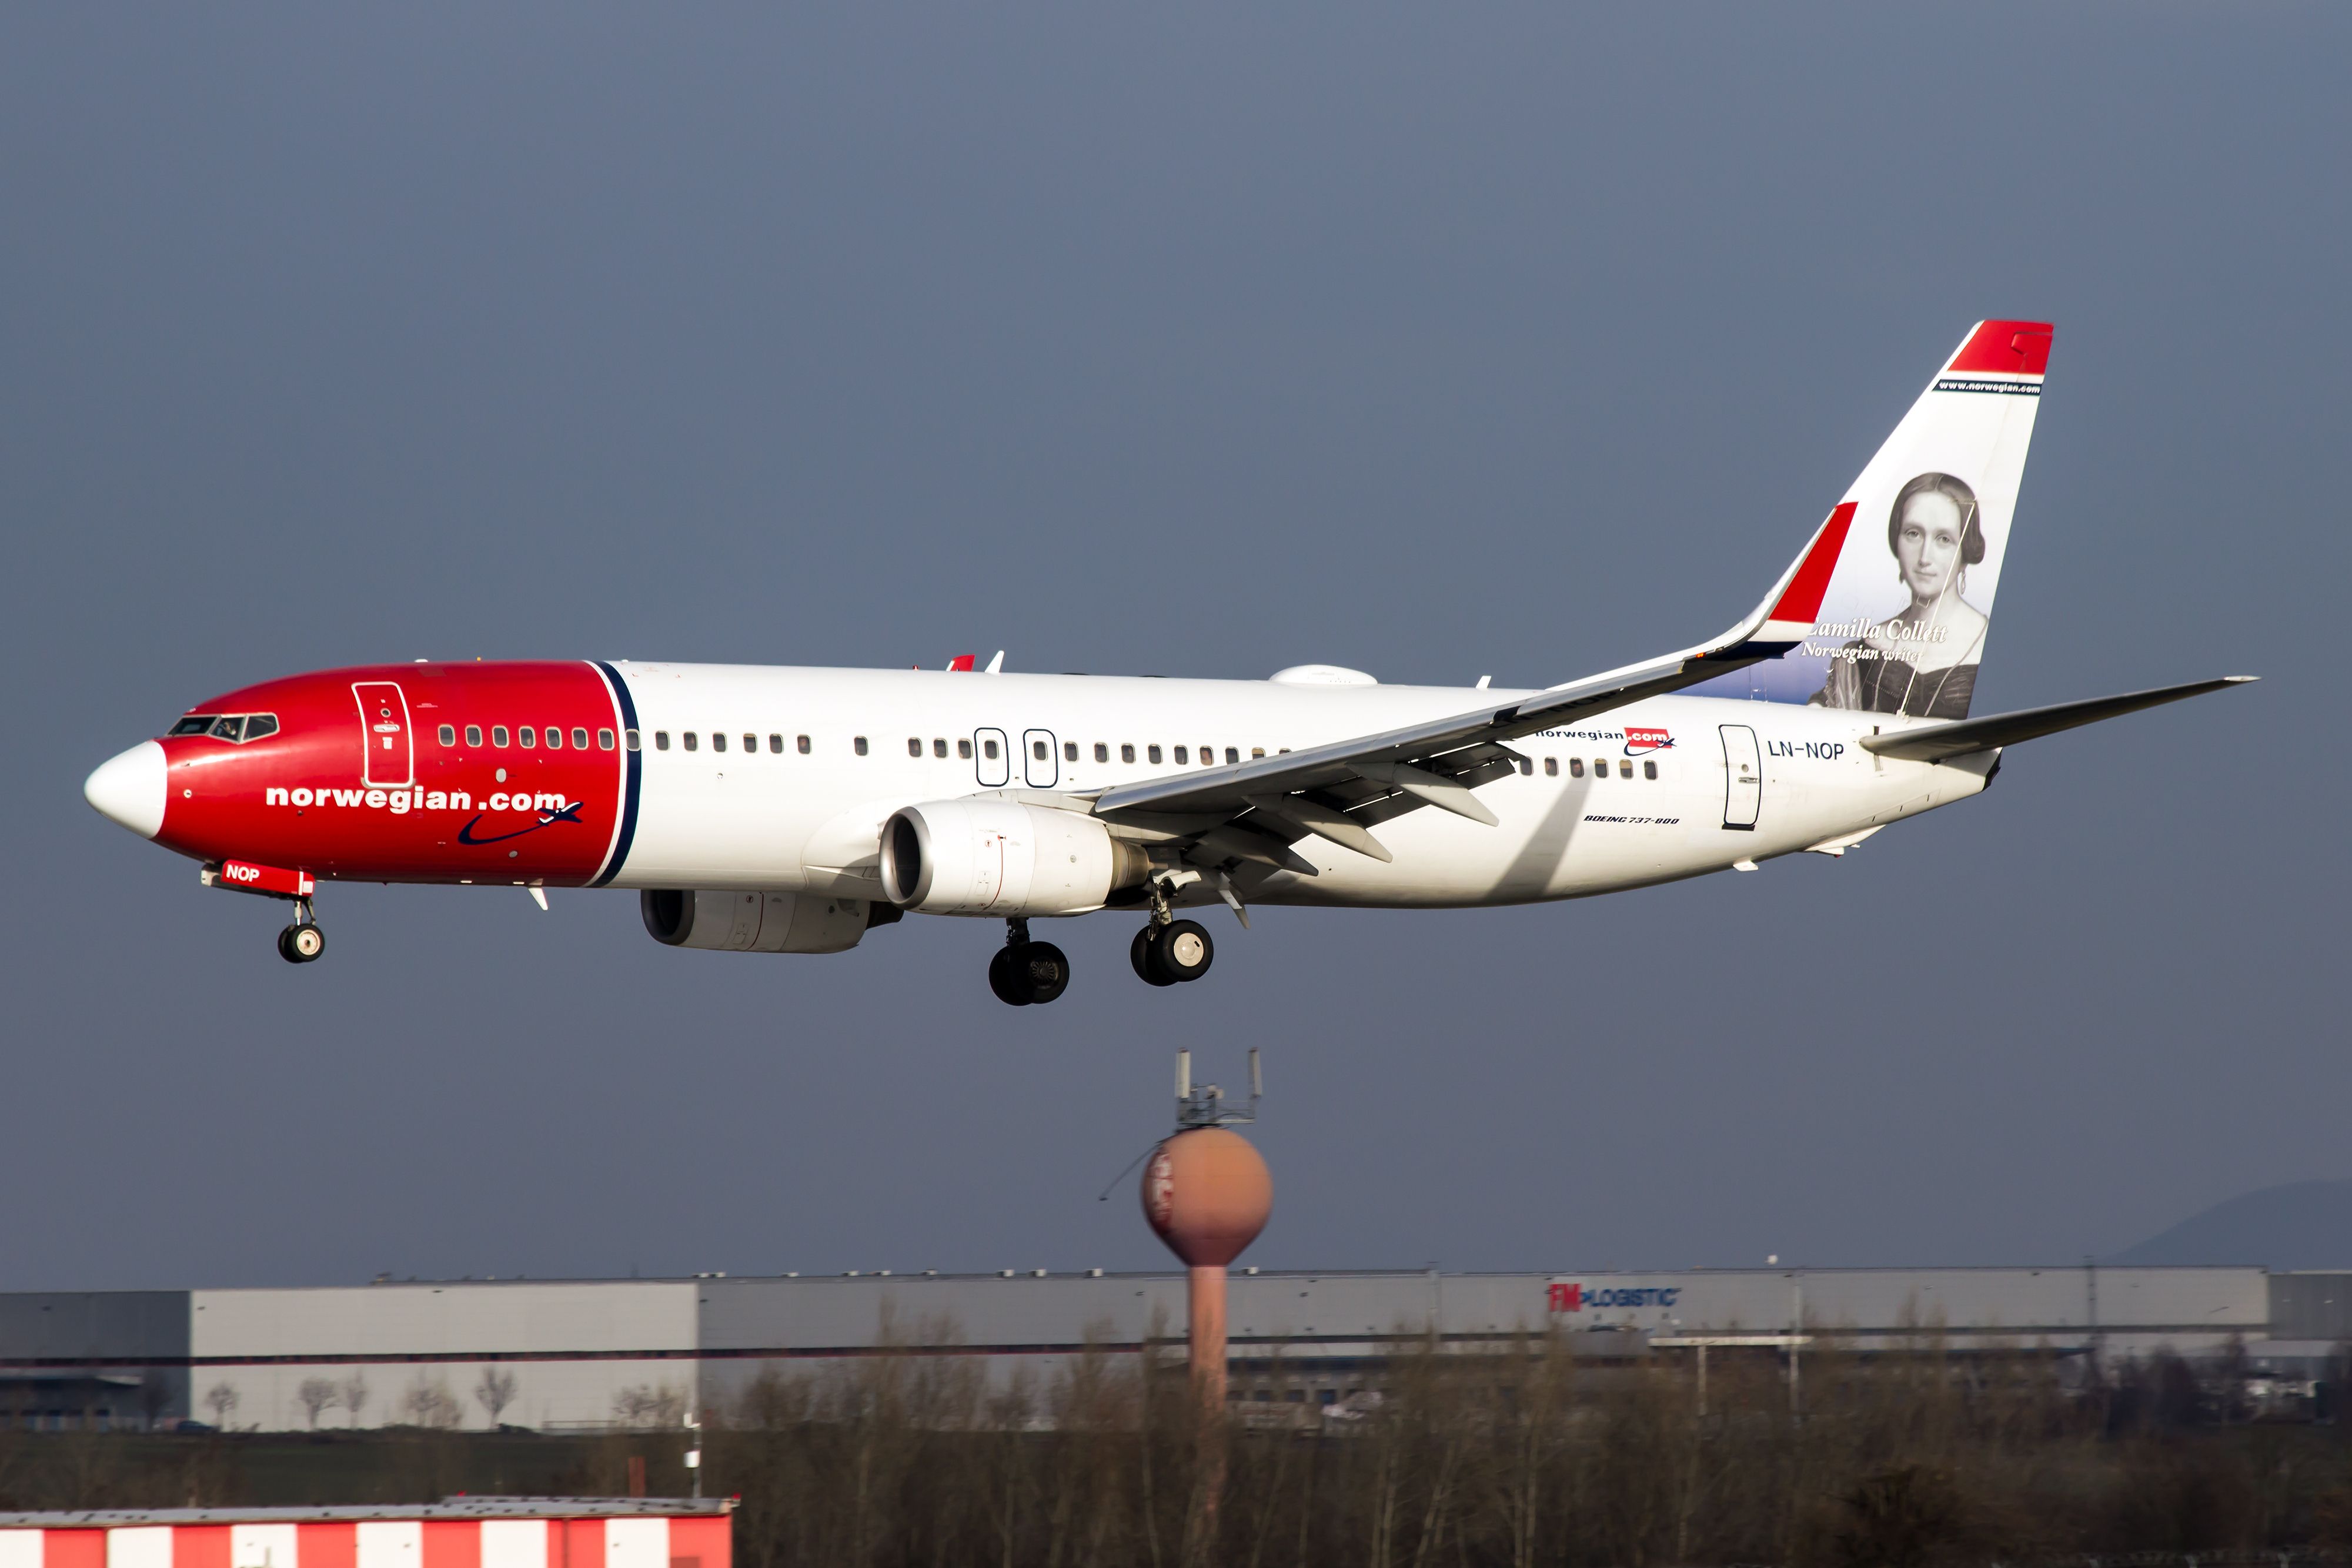 A Norwegian Boeing 737-800 about to land.